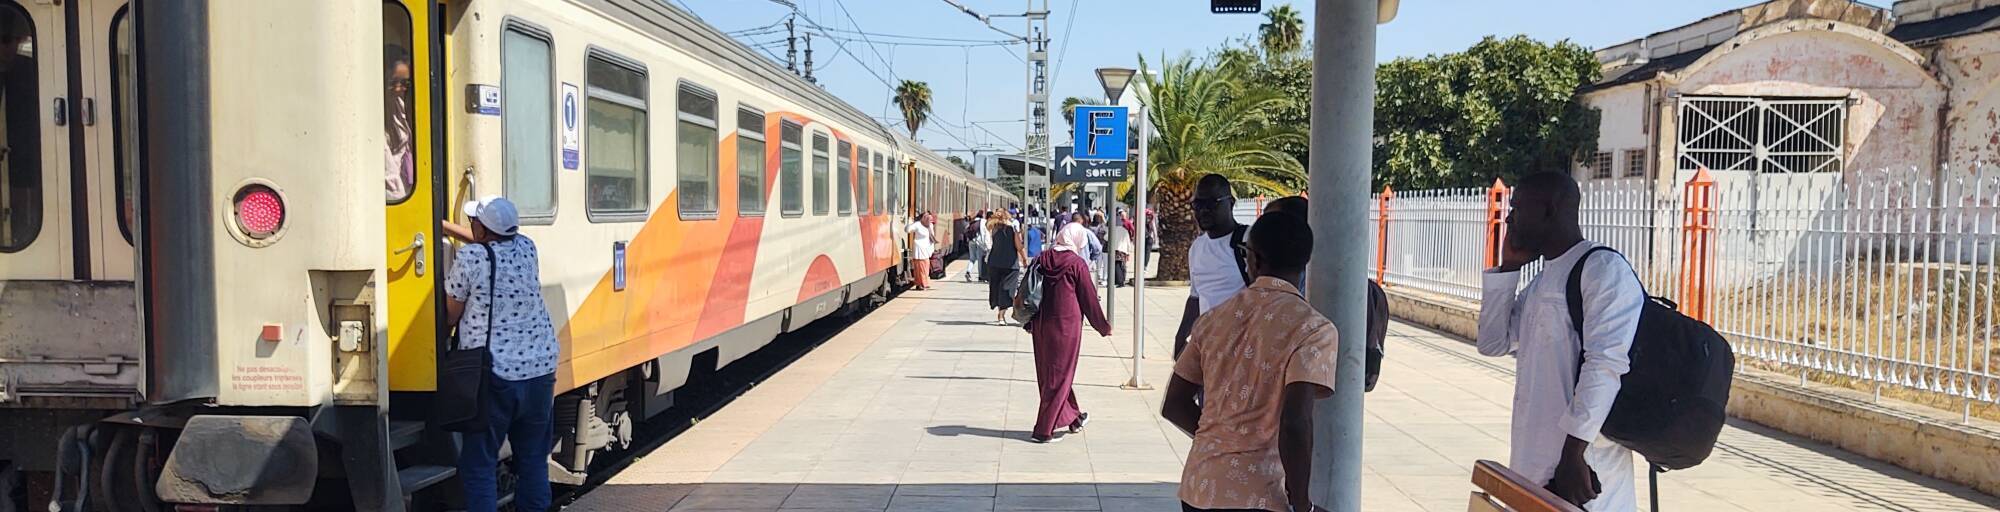 Passengers exiting and boarding a train at Fez.